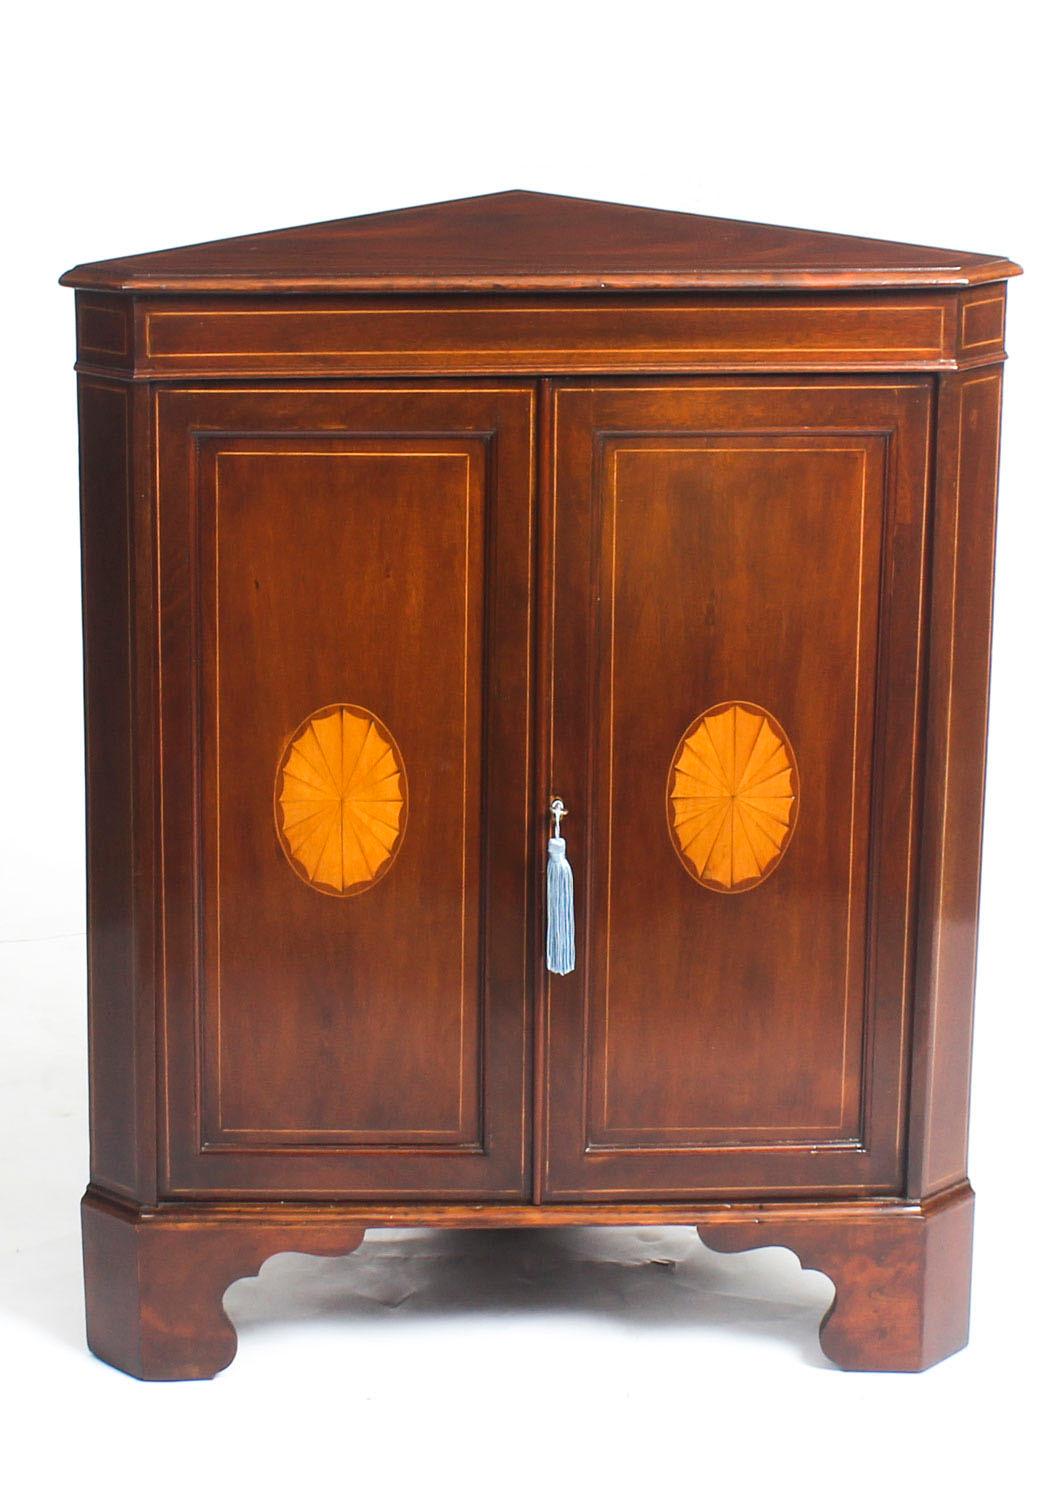 This is a fabulous antique Edwardian English Mahogany and Satinwood inlaid low corner cabinet, circa 1900 in date.

The cabinet is inlaid with a pair of satinwood fans and features boxwood stringing on the panelled doors which open to reveal a